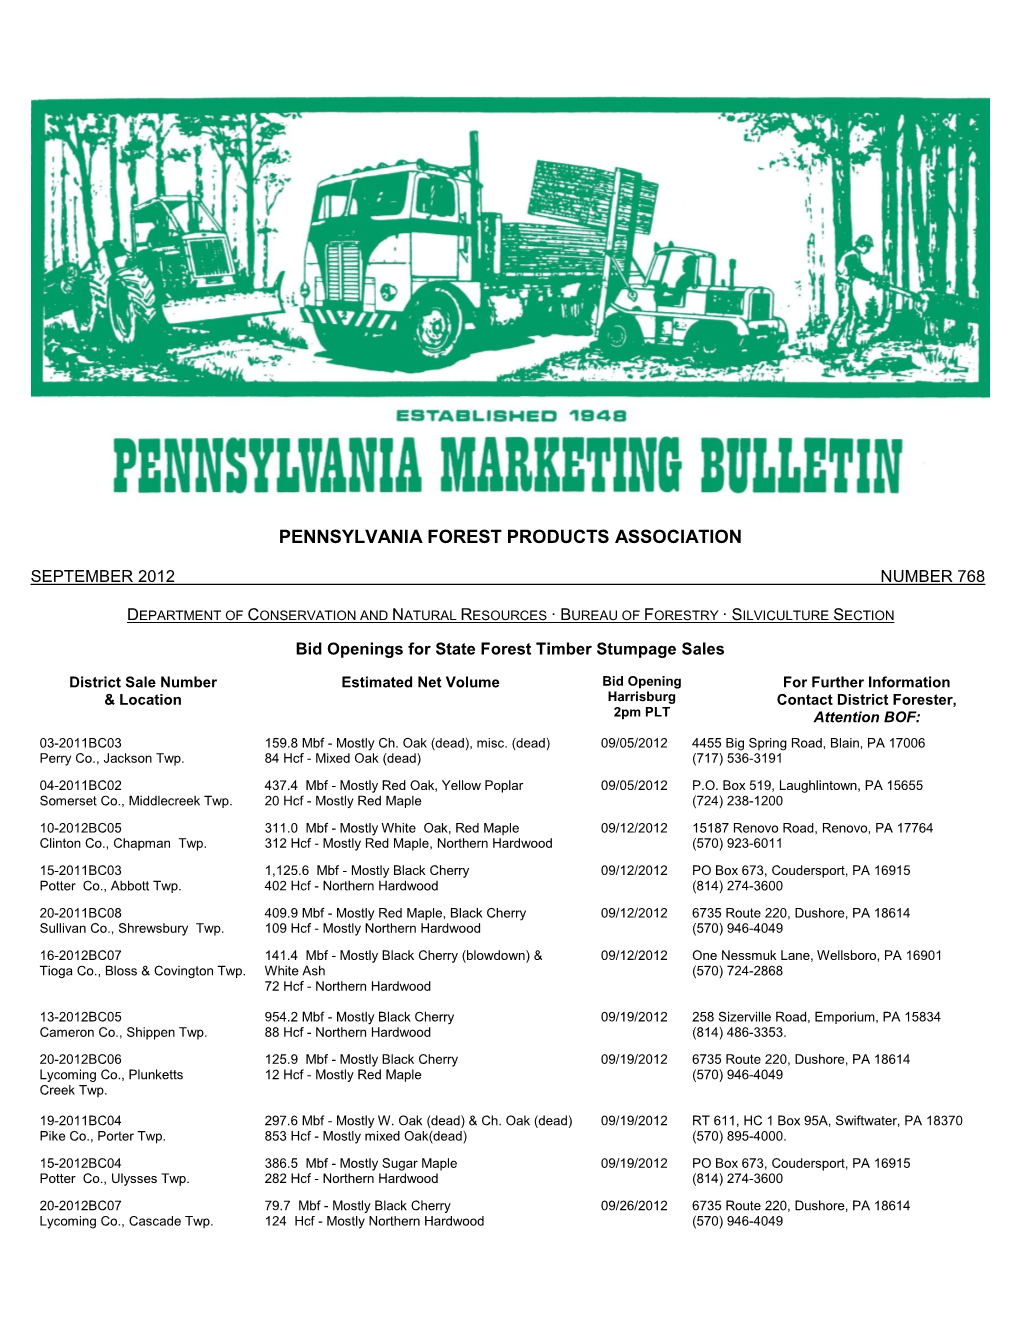 Pennsylvania Forest Products Association